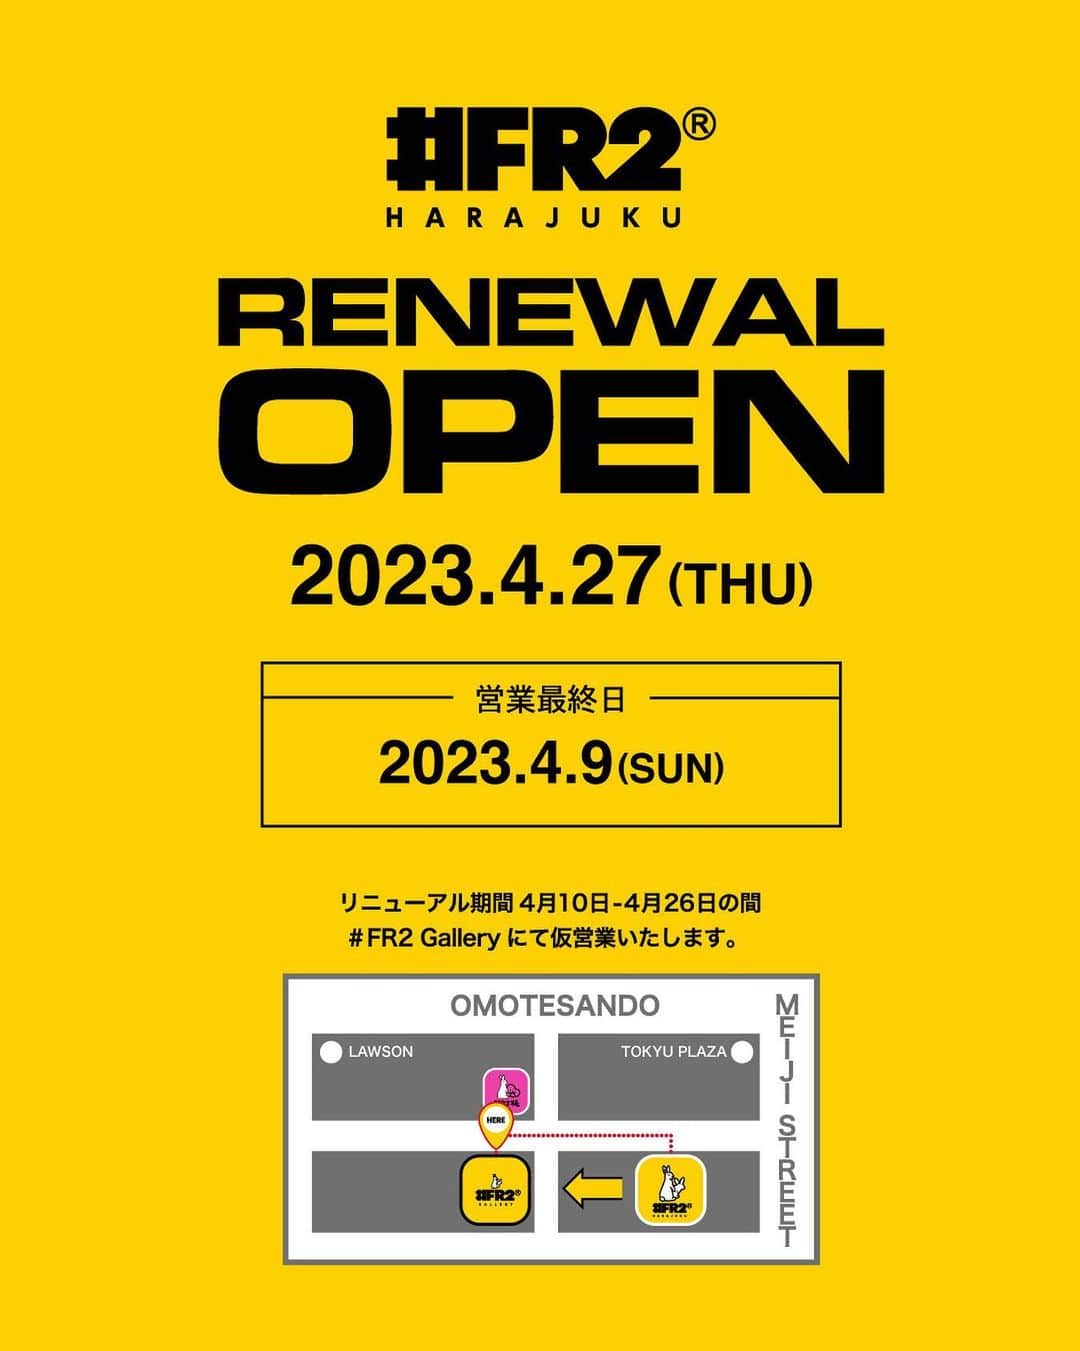 #FR2さんのインスタグラム写真 - (#FR2Instagram)「#FR2 HARAJUKU 2023.4.27 (thu) “RENEWAL OPEN”  Thank you for your patronage of #FR2 HARAJUKU. Our store will be renewal on Thursday, 27th April, 2023. We apologize for the inconvenience during the period of our renovation works. Please look forward to the new #FR2 HARAJUKU.  During the period of renovation works prior to the renewal, we will temporarily be operating at our #FR2 Gallery location.  #FR2 Gallery April 10th - April 26th 1F, 4-28-16 Jingumae, Shibuya-ku, Tokyo Business hours: 11:00 - 21:00  #FR2 HARAJUKU 2023.4.27(thu) “RENEWAL OPEN”  いつも#FR2 HARAJUKUをご愛顧いただき、 誠にありがとうございます。 当店は、2023年4月27日(木)にリニューアルオープンいたします。 オープンまでの期間中、お客様にはご迷惑をお掛けいたしますが 新しく生まれ変わる、#FR2 HARAJUKUにご期待ください。  リニューアル期間#FR2 Galleryにて仮営業いたします。  #FR2 Gallery 4月10日 - 4月26日 東京都渋谷区神宮前4-28-16 1F 営業時間：11:00 - 21:00  #FR2#fxxkingrabbits#頭狂色情兎 #FR2HARAJUKU」4月5日 19時24分 - fxxkingrabbits